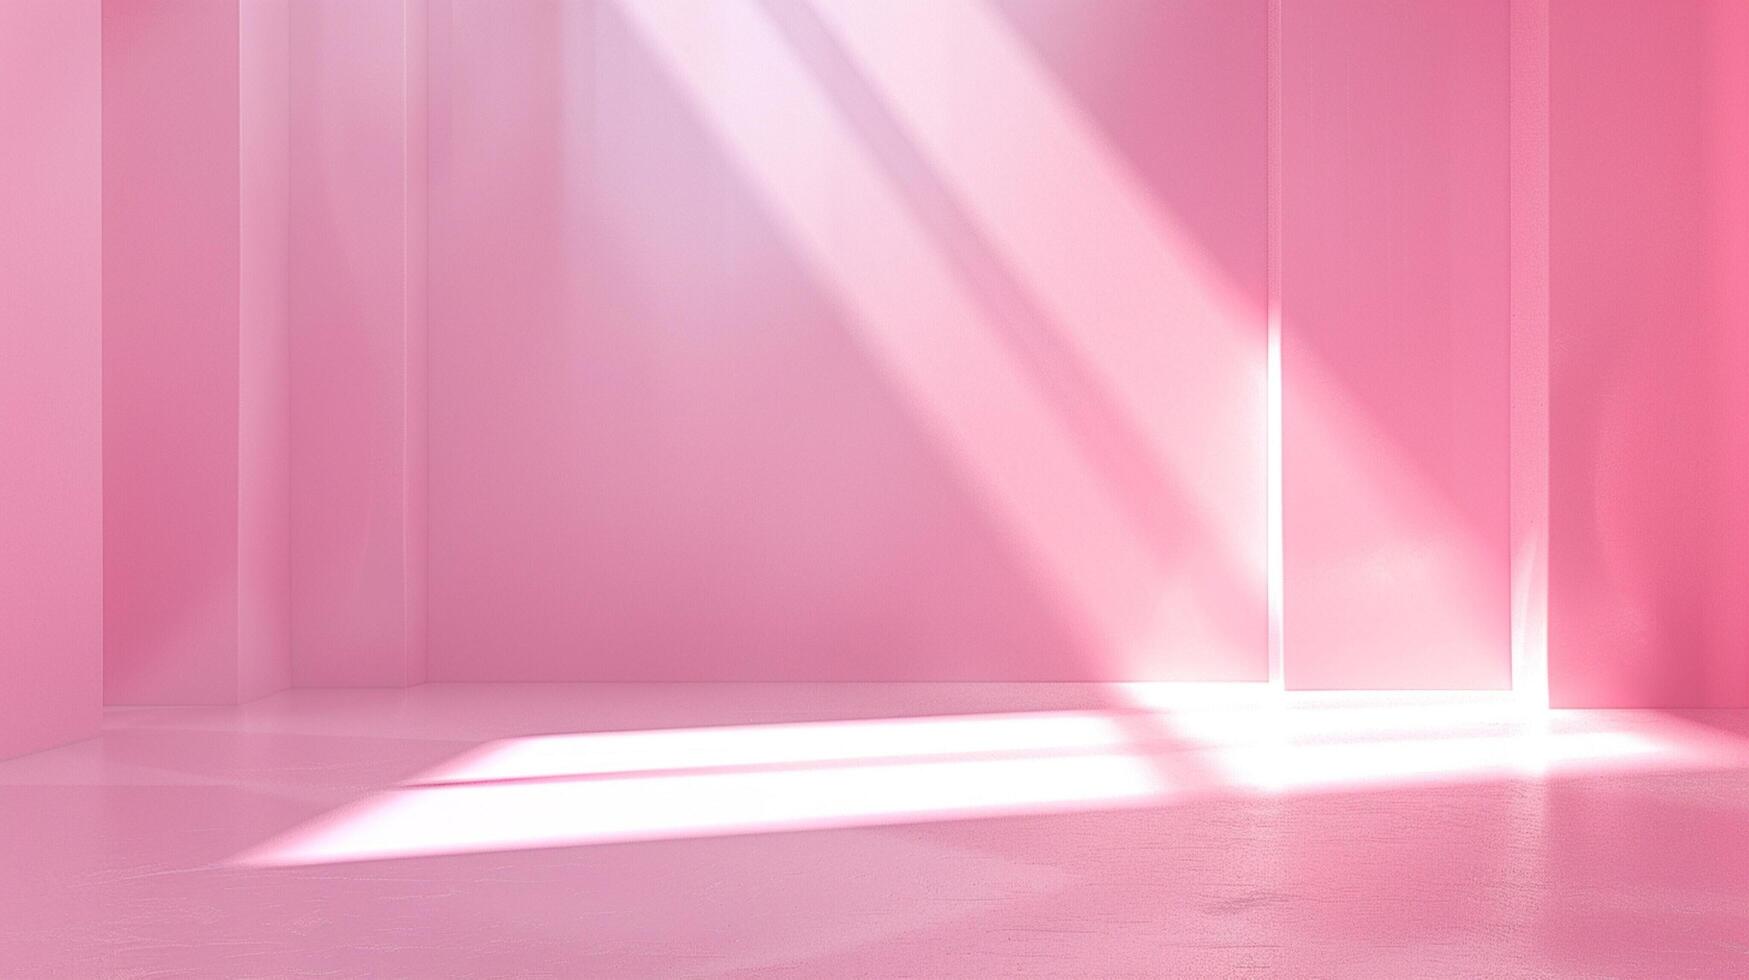 abstract empty smooth light pink studio room photo